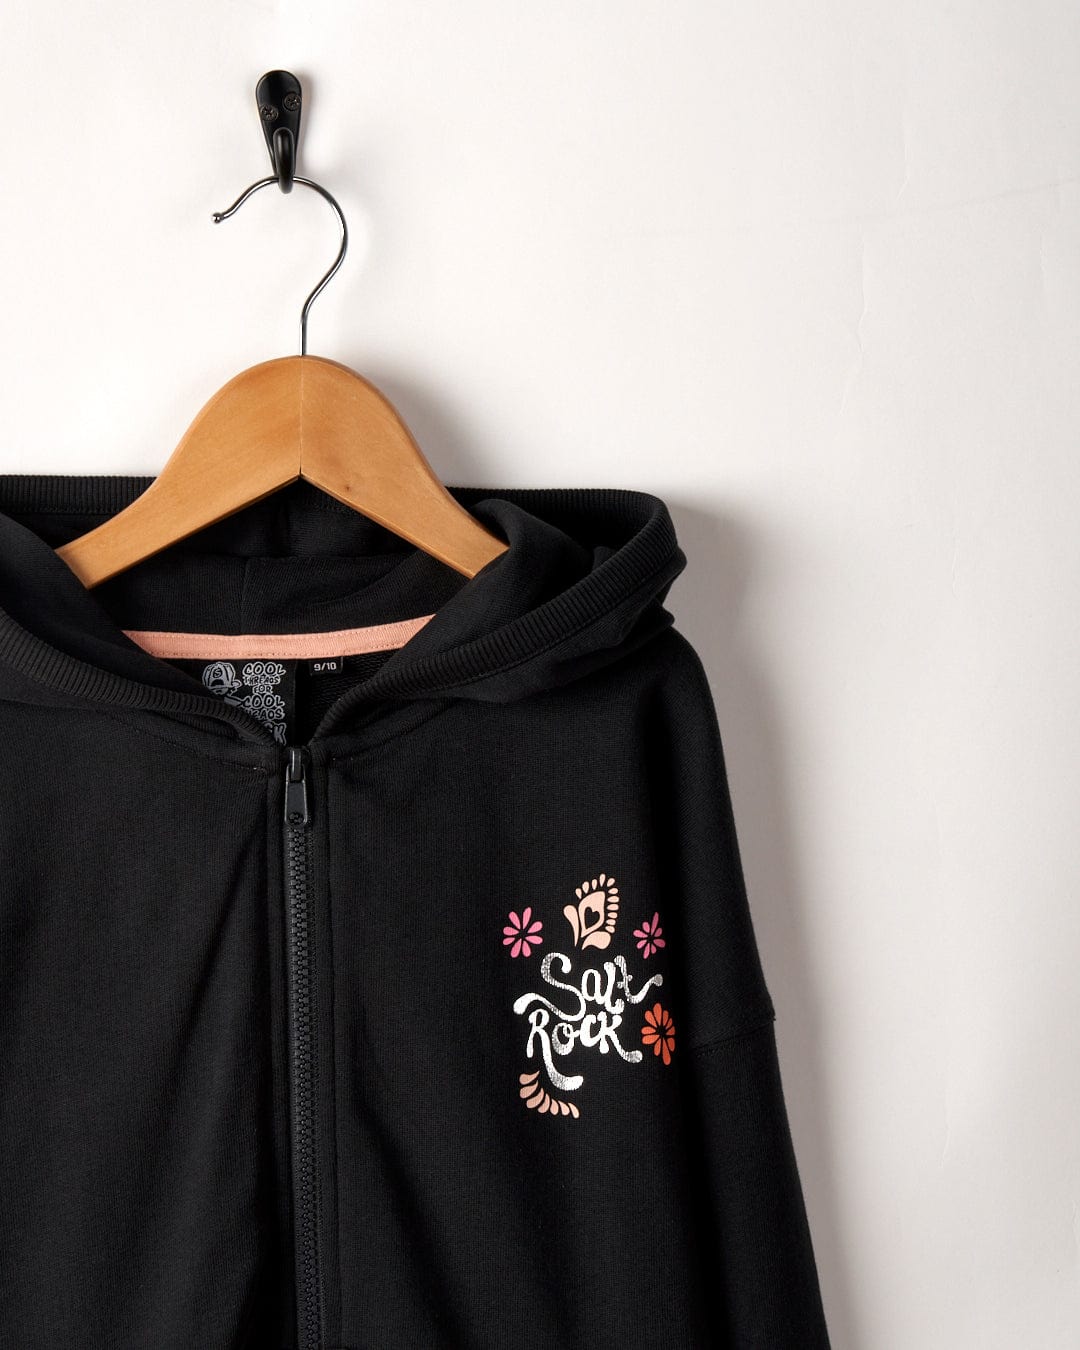 A Tahiti Van - Kids Zip Hoodie - Washed Black with a colorful skull and floral design, labeled "Saltrock branding," hangs on a wooden hanger against a white wall.